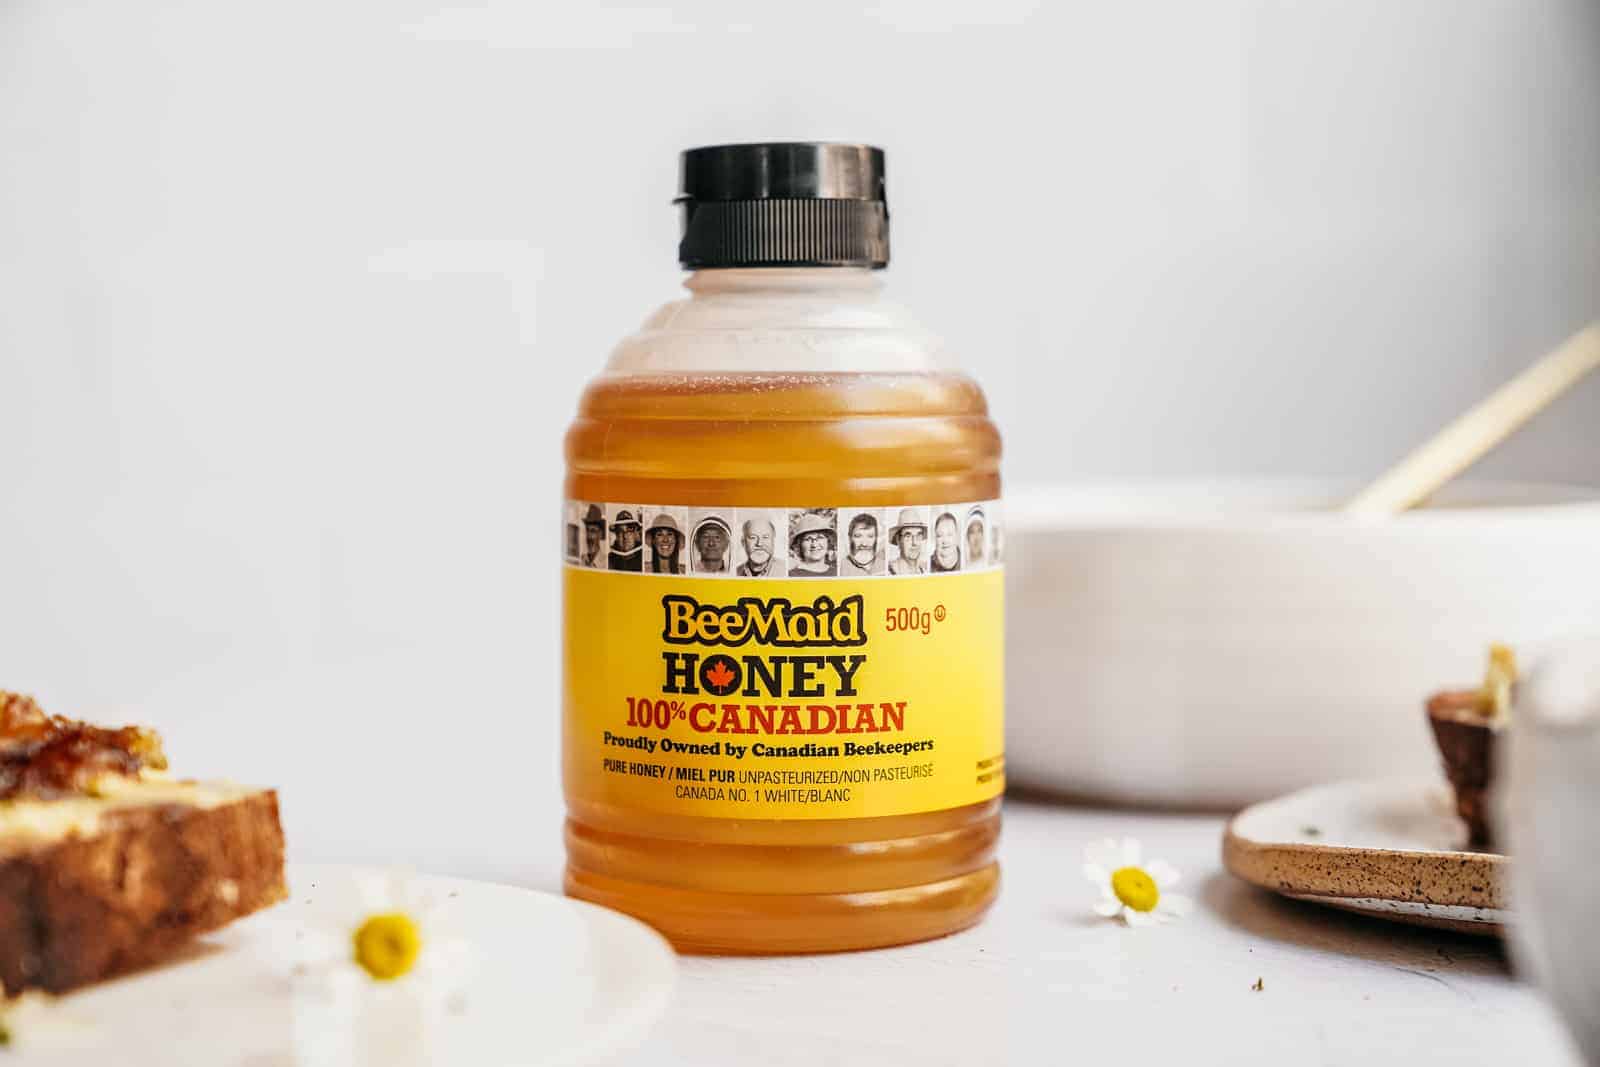 Container of Bee Maid Honey on countertop.